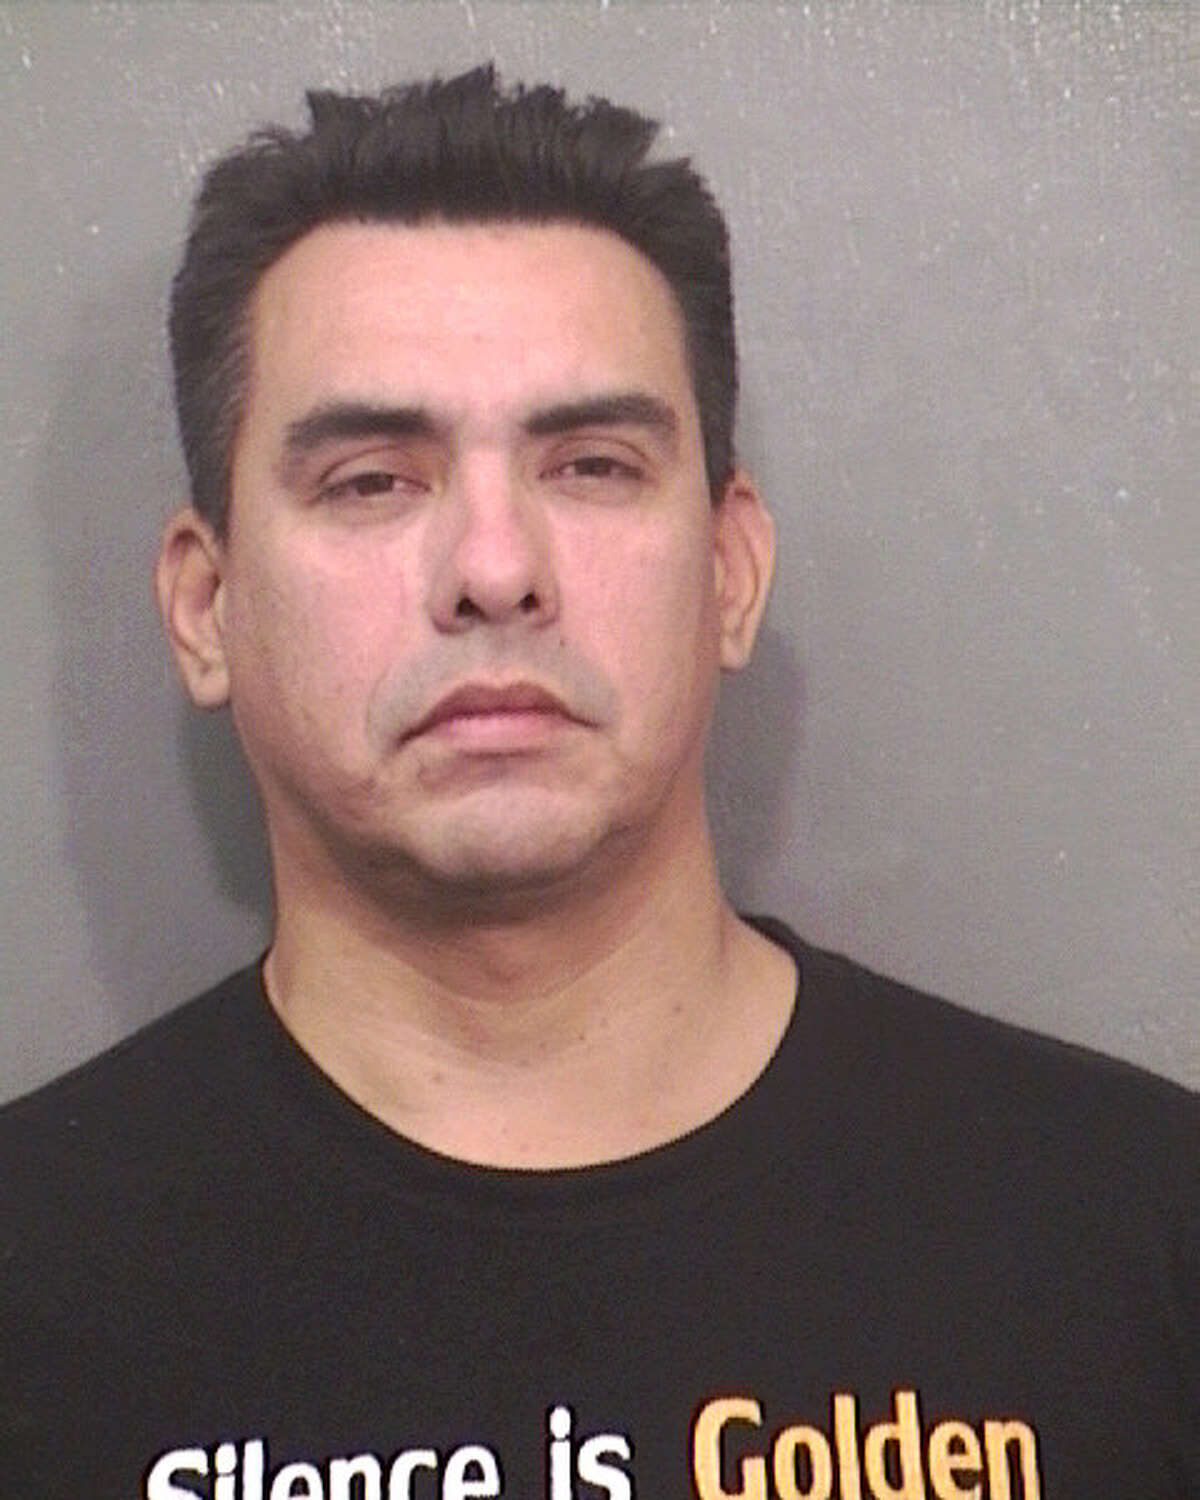 Mug is of Mario Joseph Nieto (dob 11-16-1967) arrested for robbery and impersonation of a police officer.